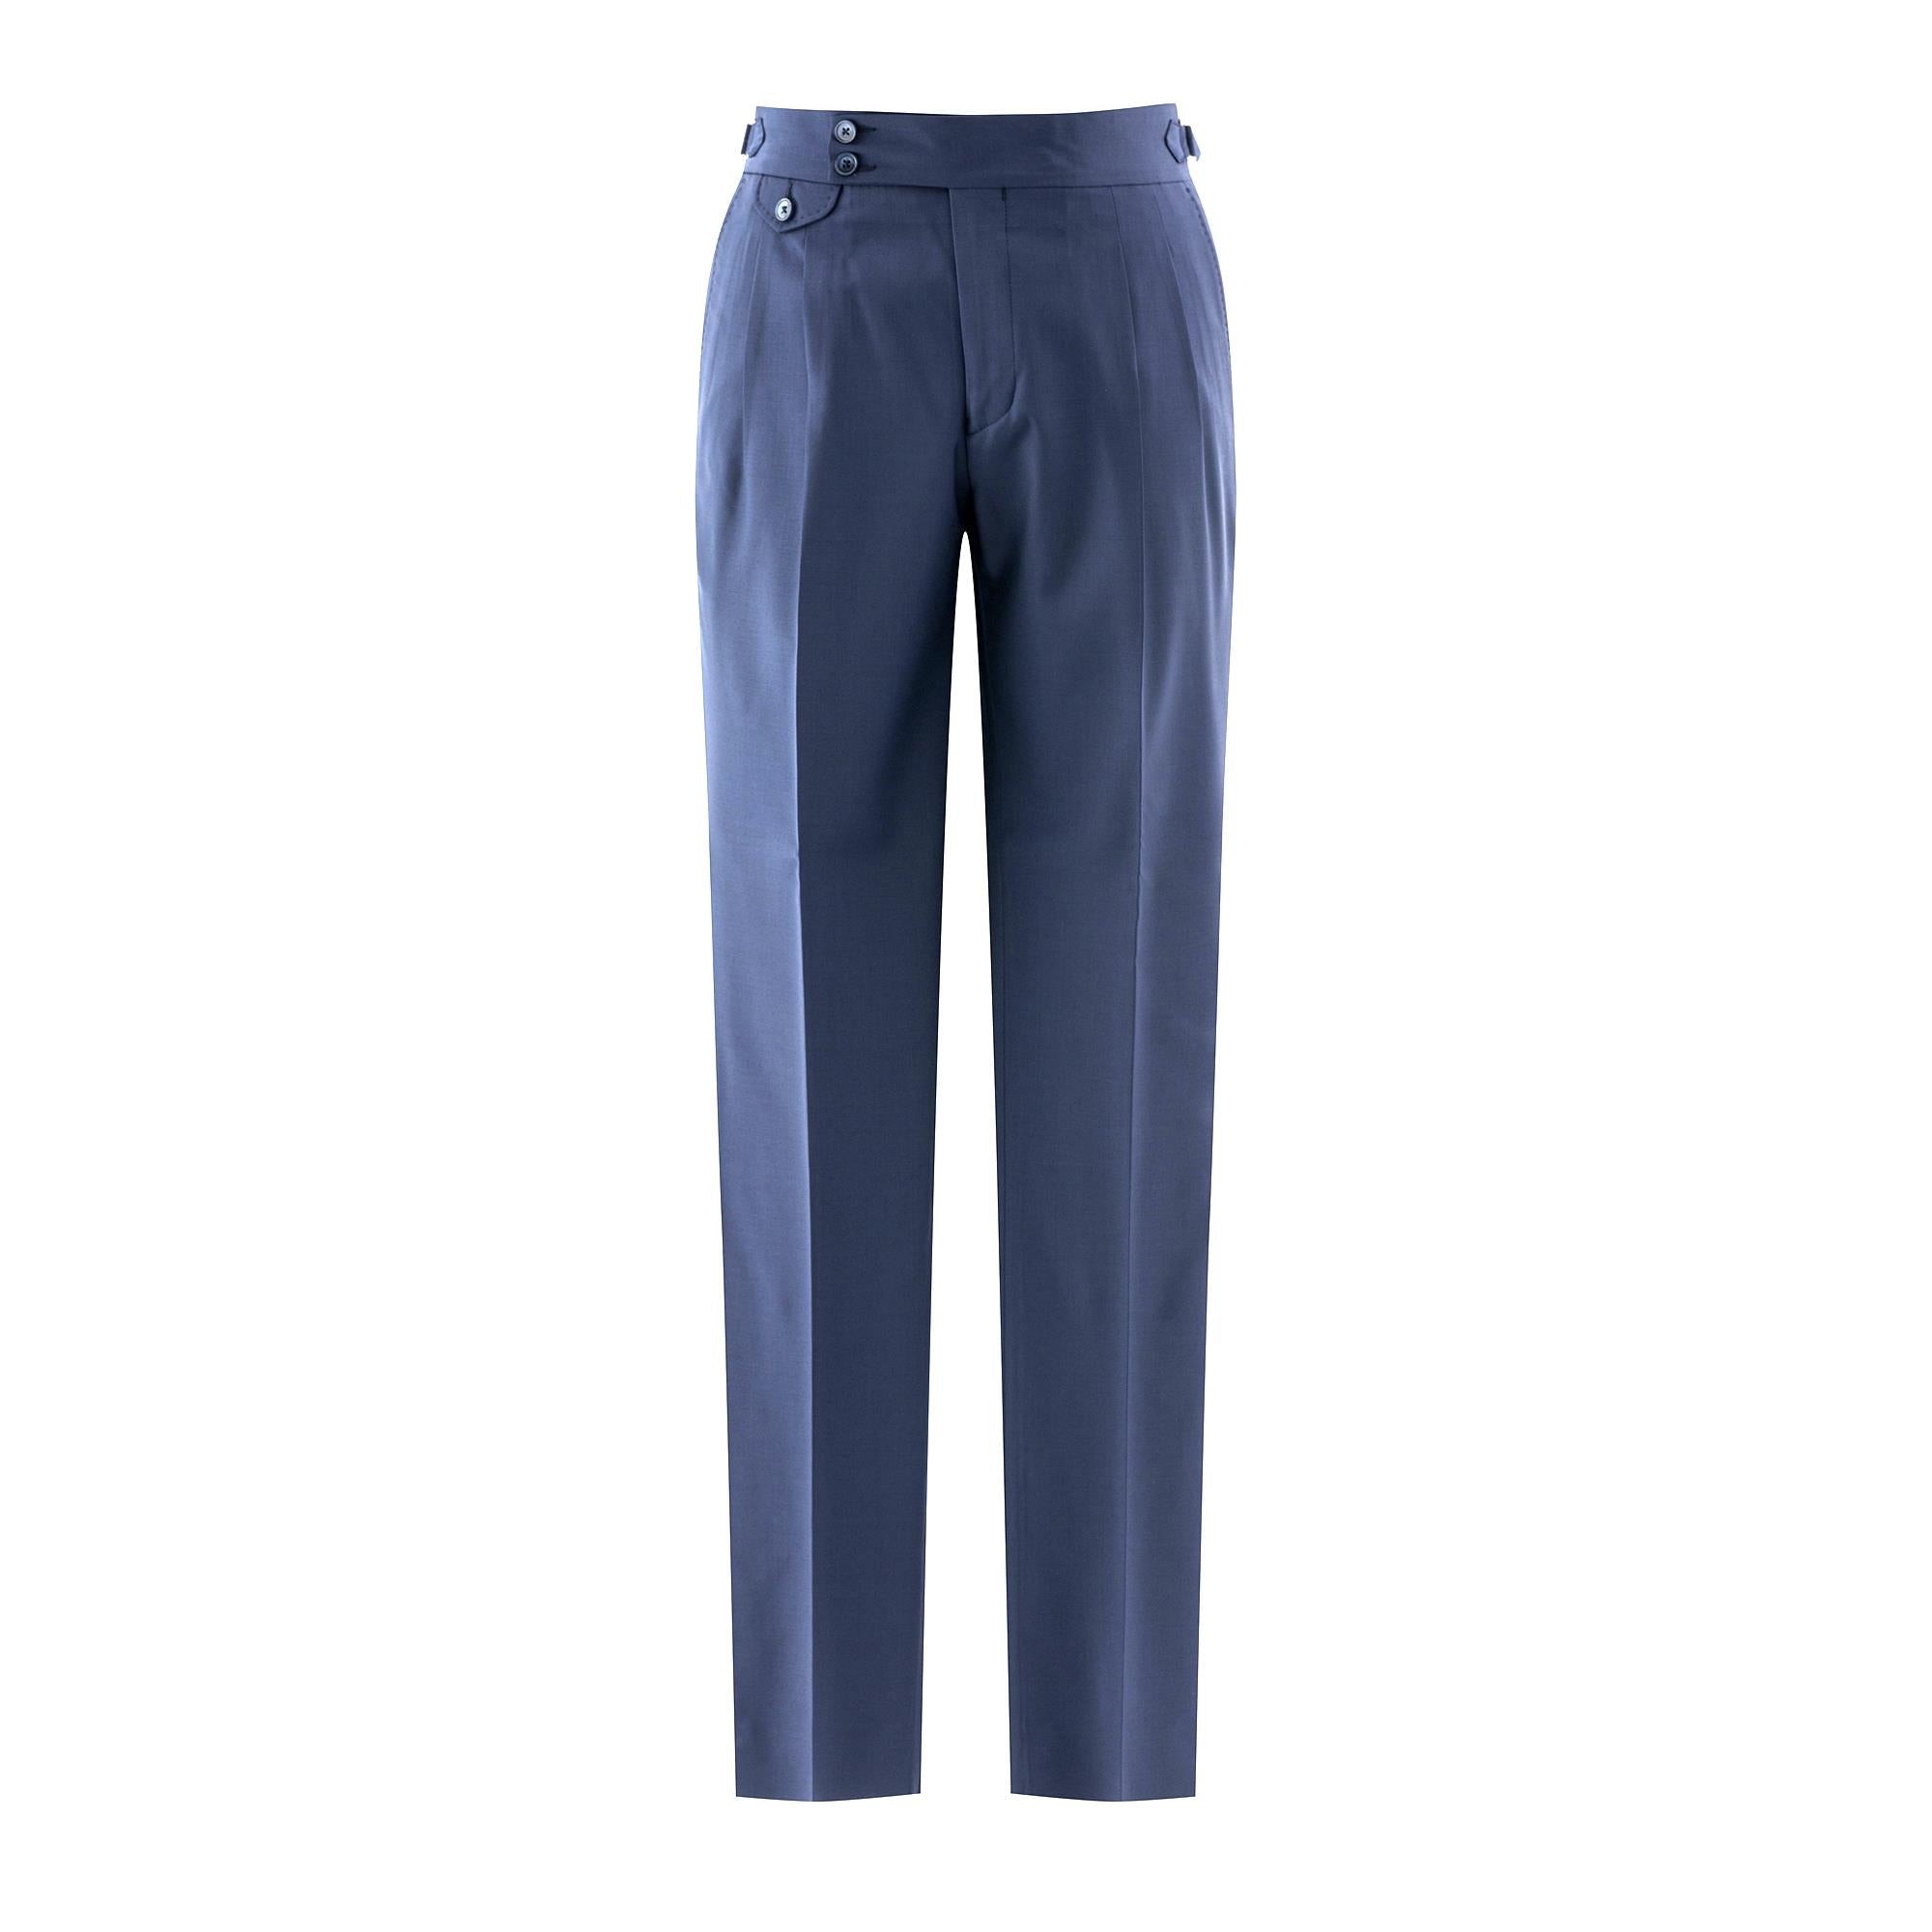 GALA NAVY BLUE TROUSERS